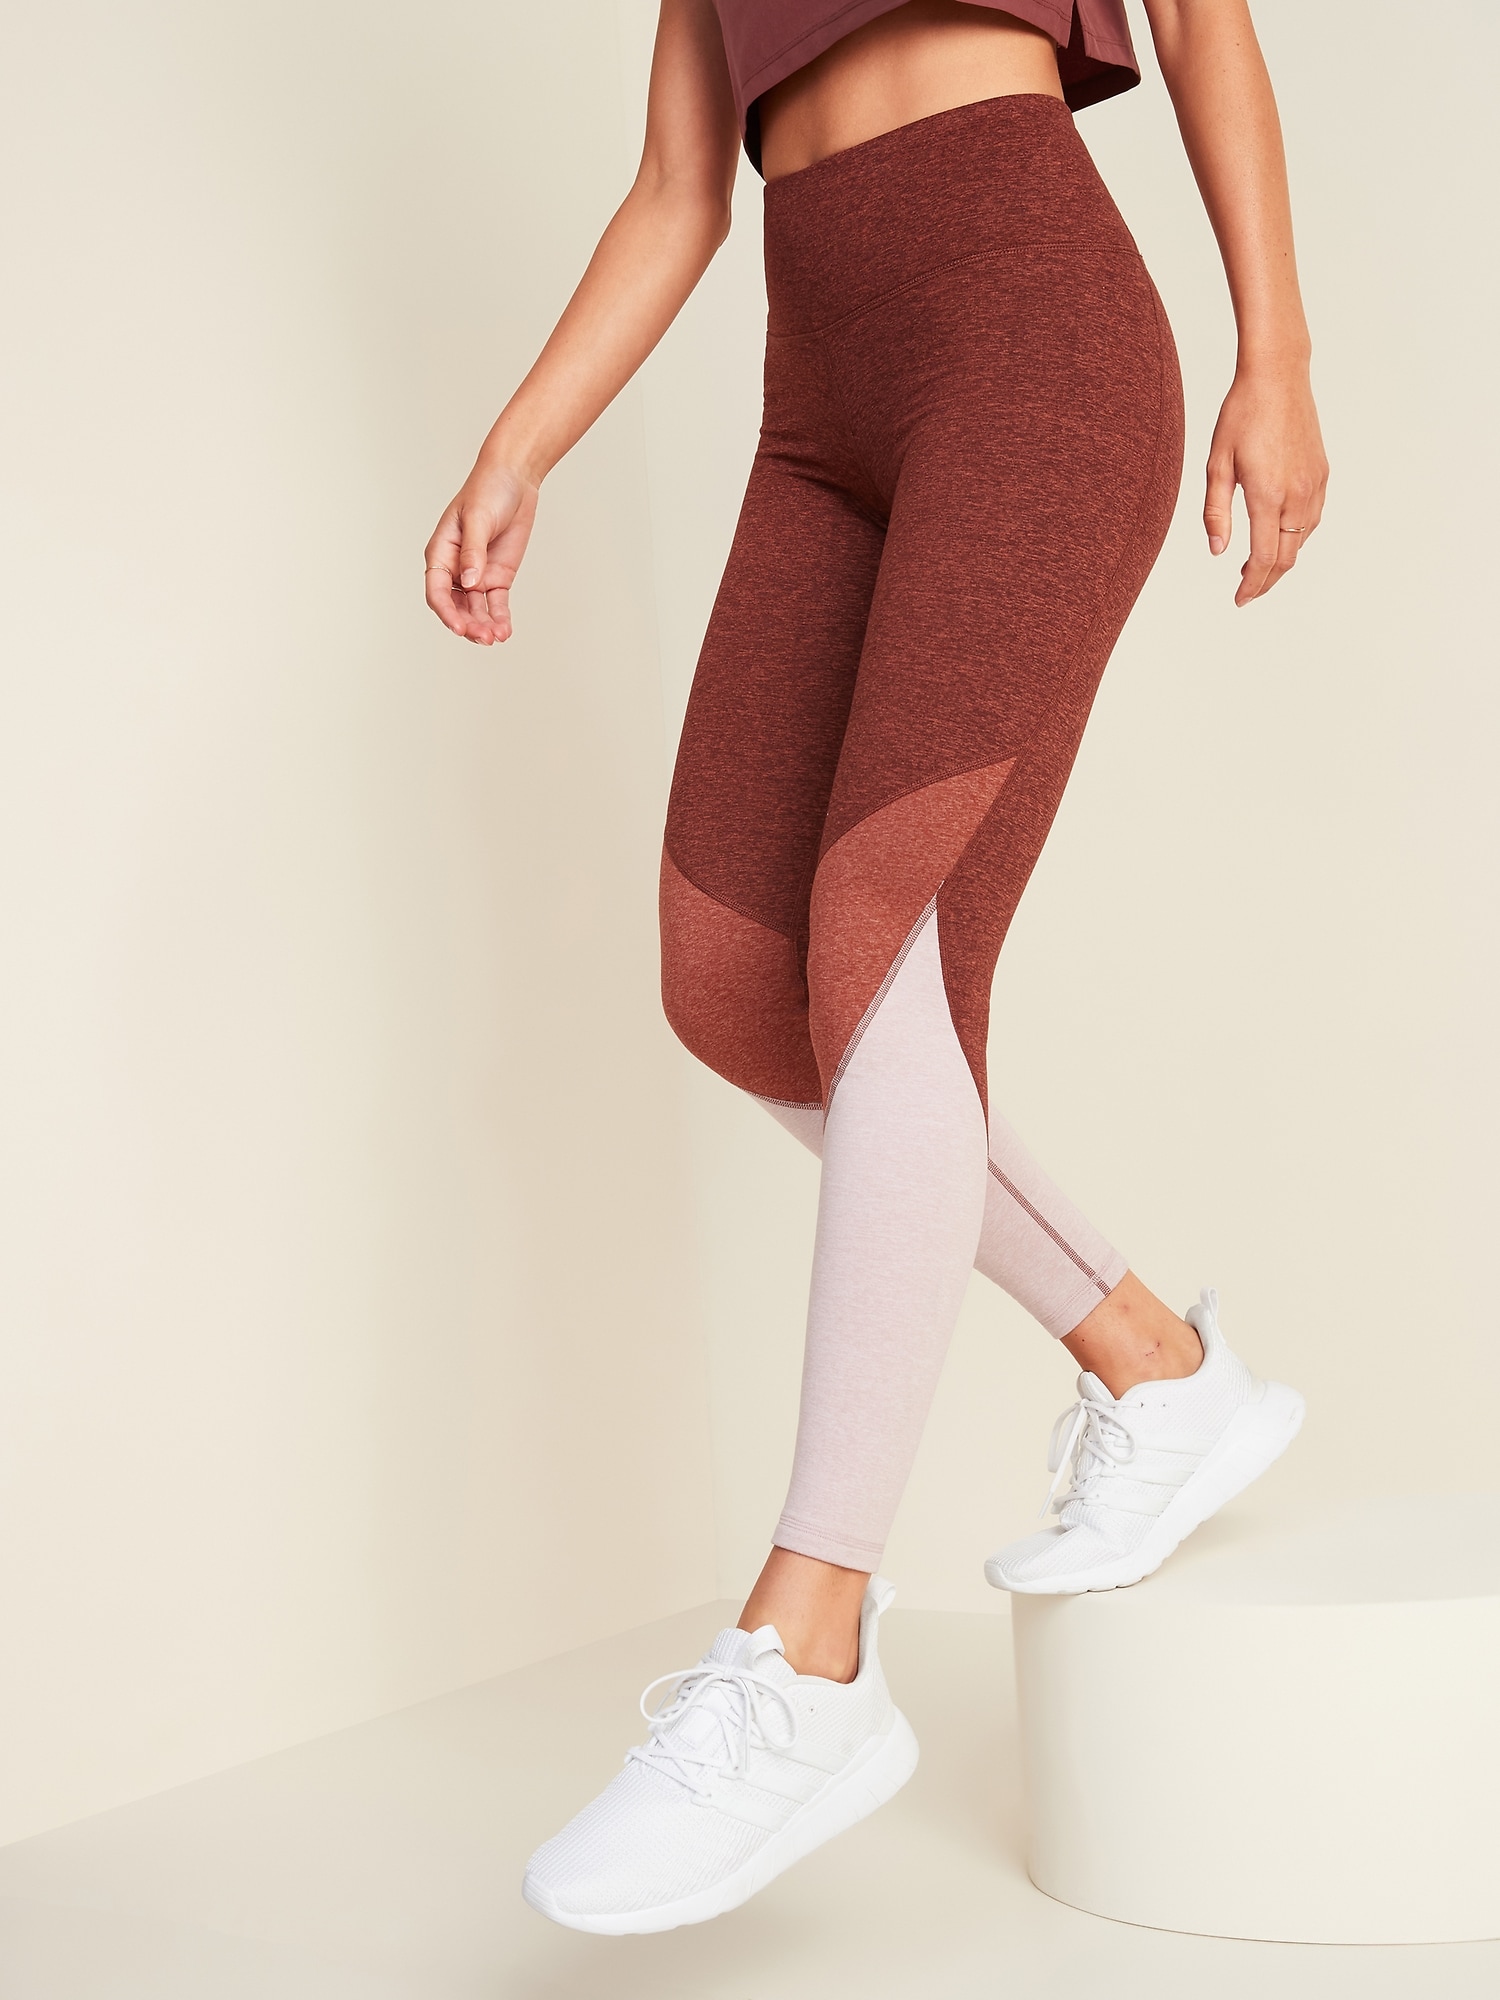 High Waisted Color Block Leggings, Tights With Great Support – cosvos